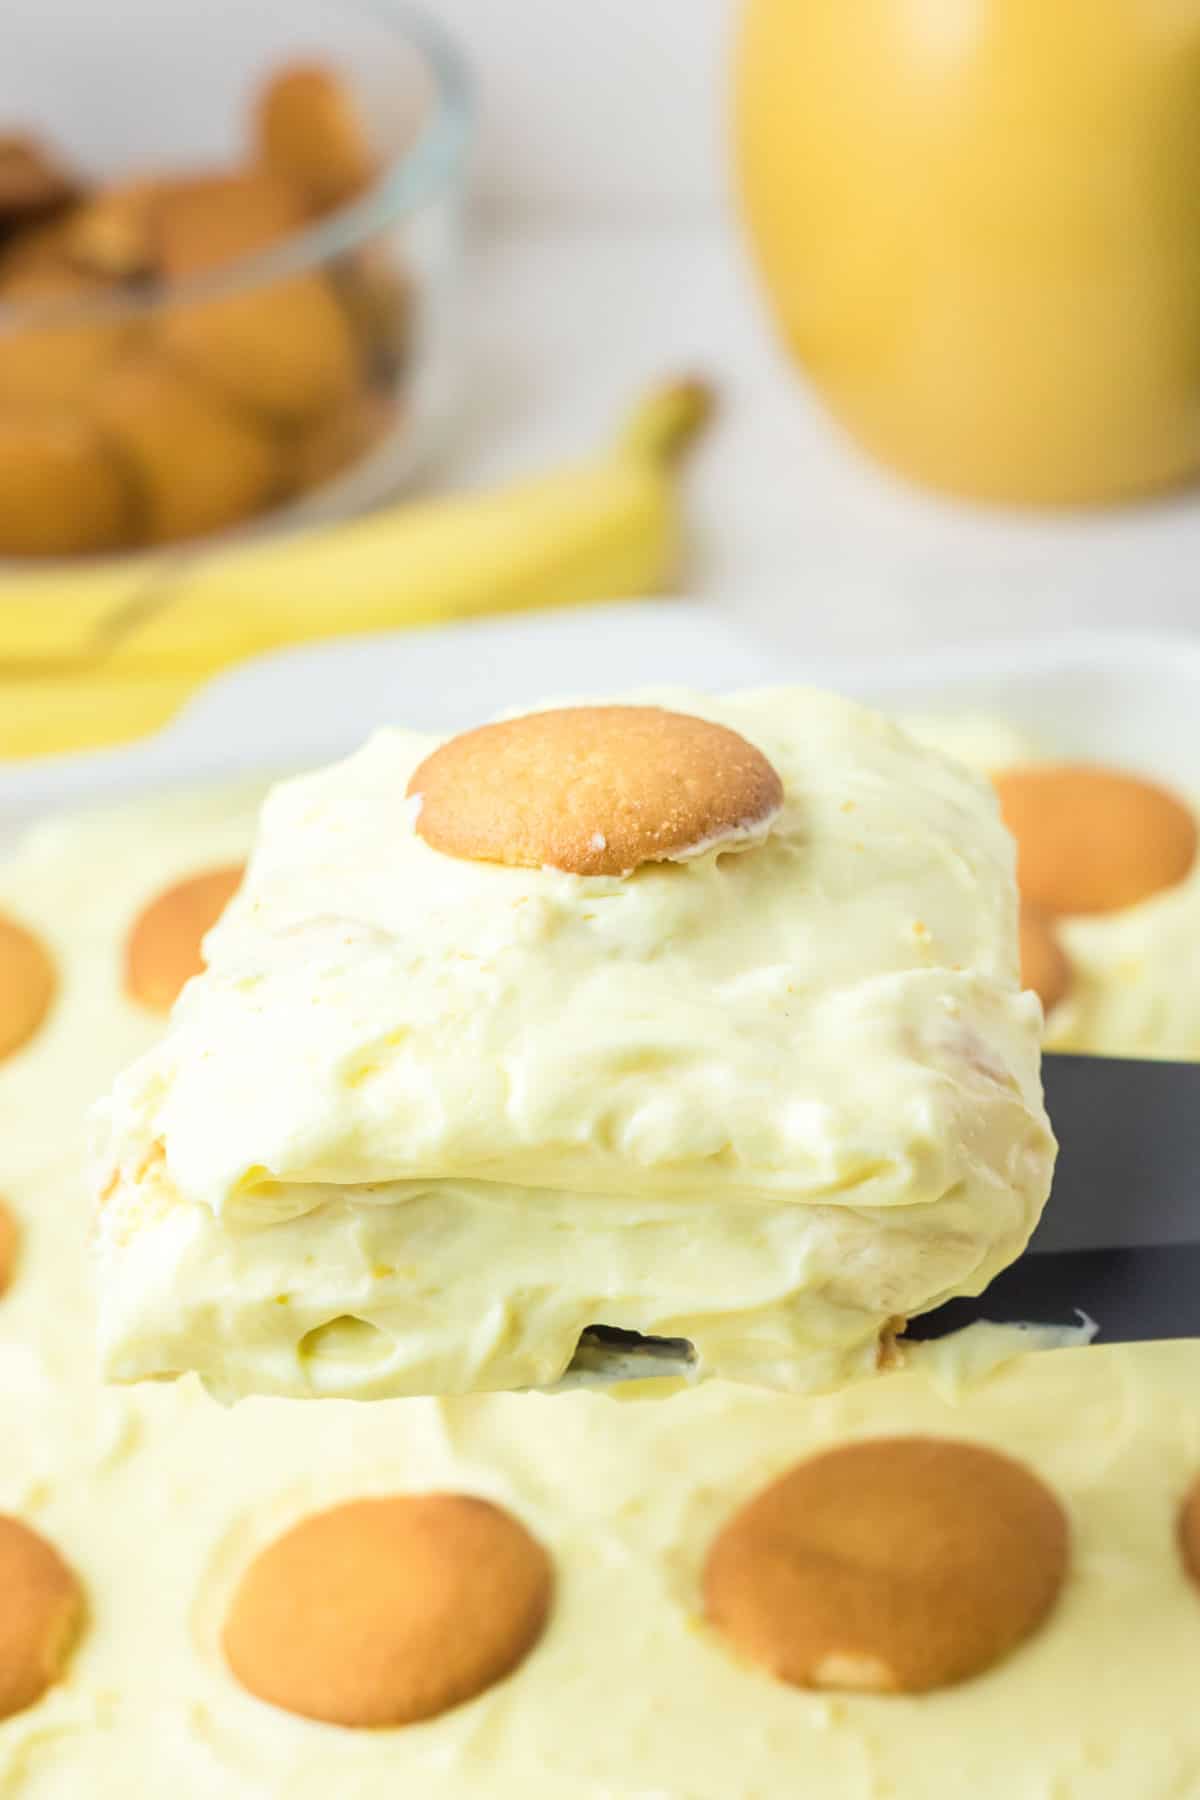 Banana pudding with sour cream serving on a spatula over the dessert.